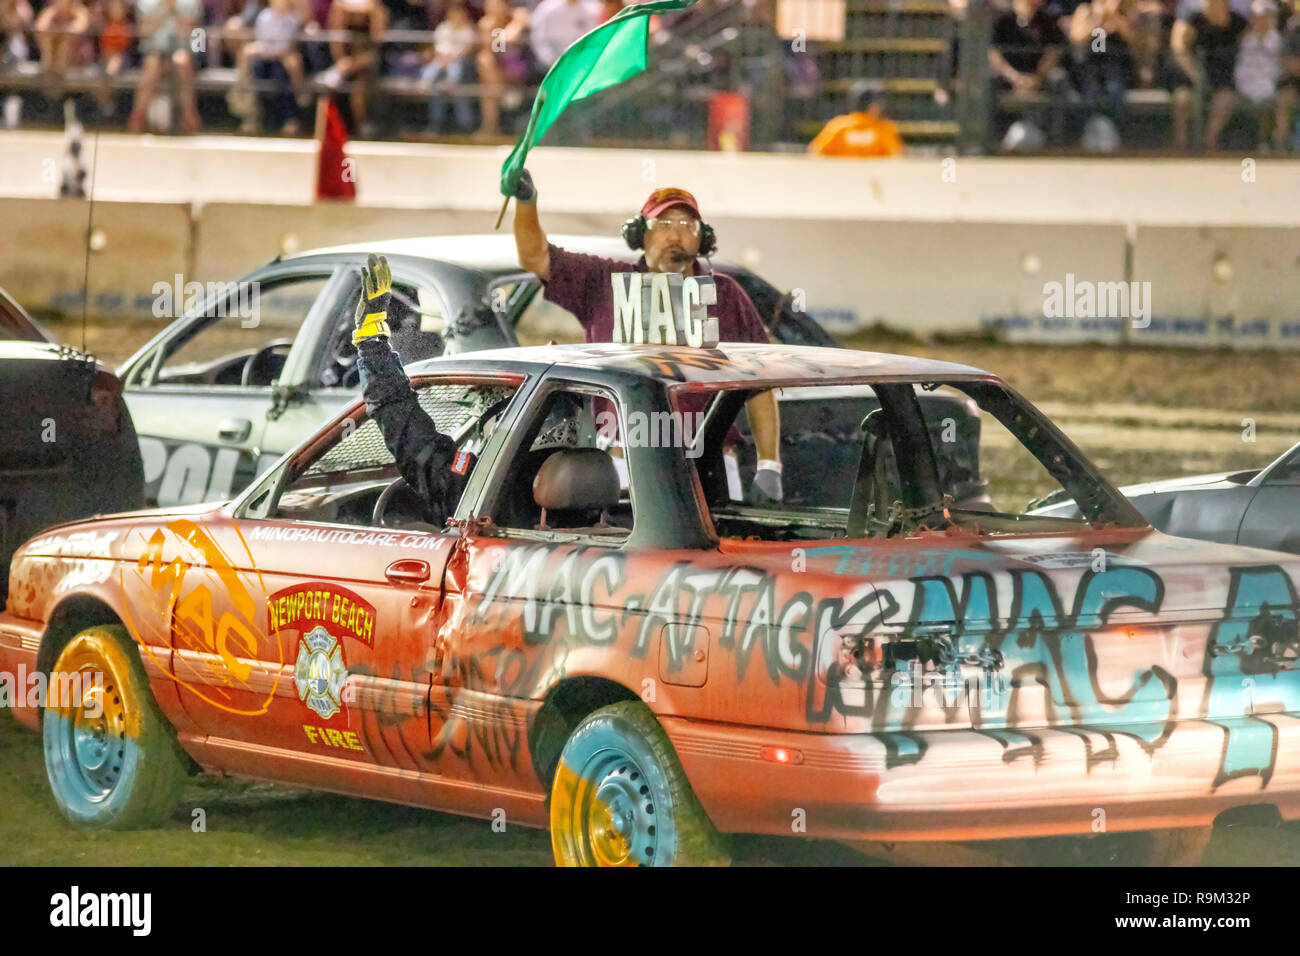 A referee waves a green flag to signal the start of a car-crashing demo derby in a Costa Mesa, CA, stadium. Stock Photo